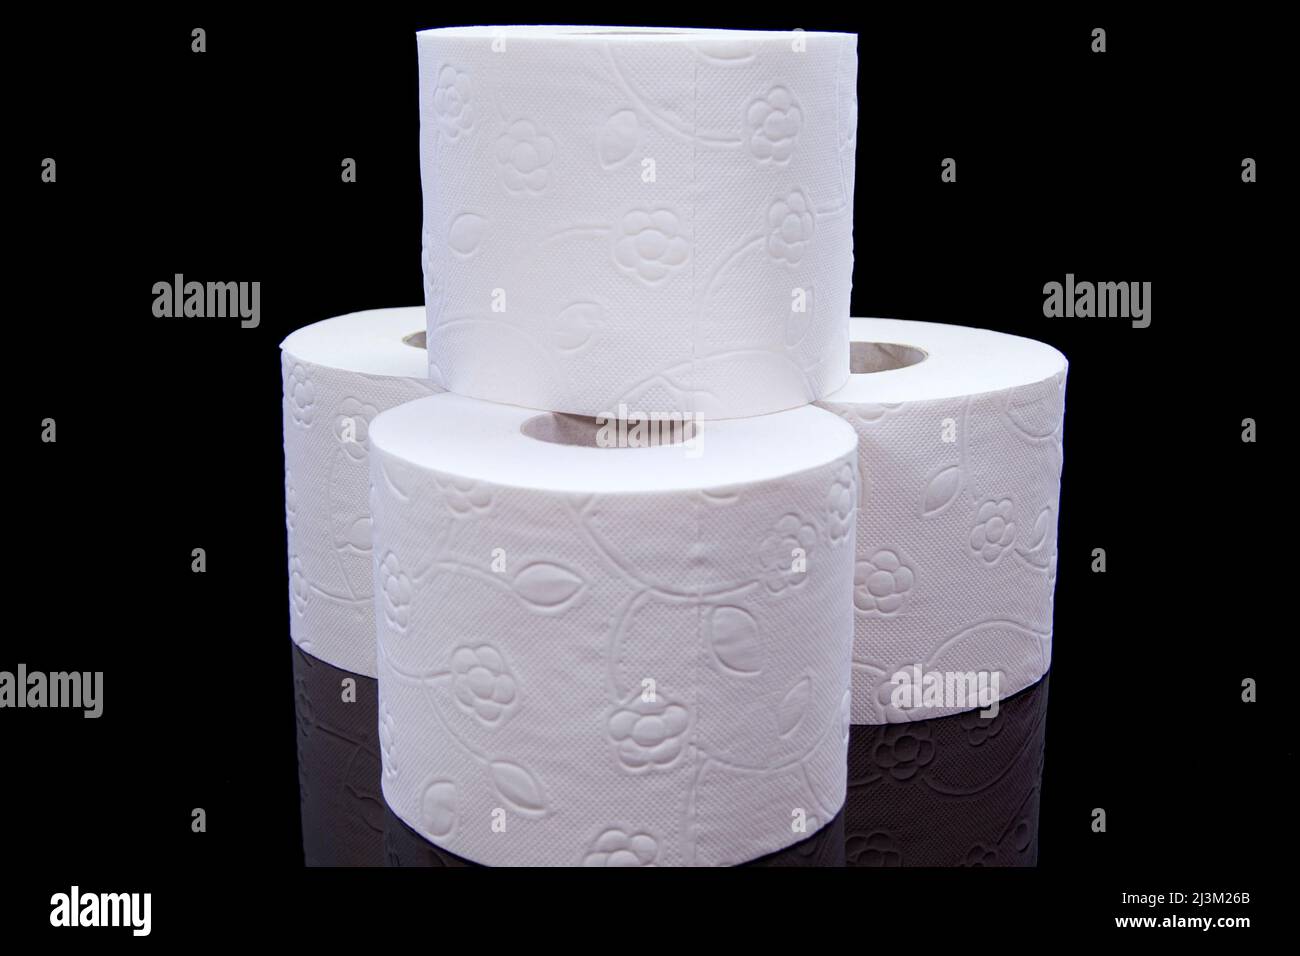 Toilet paper rolls on a black background. Presentation of toilet paper roll, isolated on black background. Stock Photo